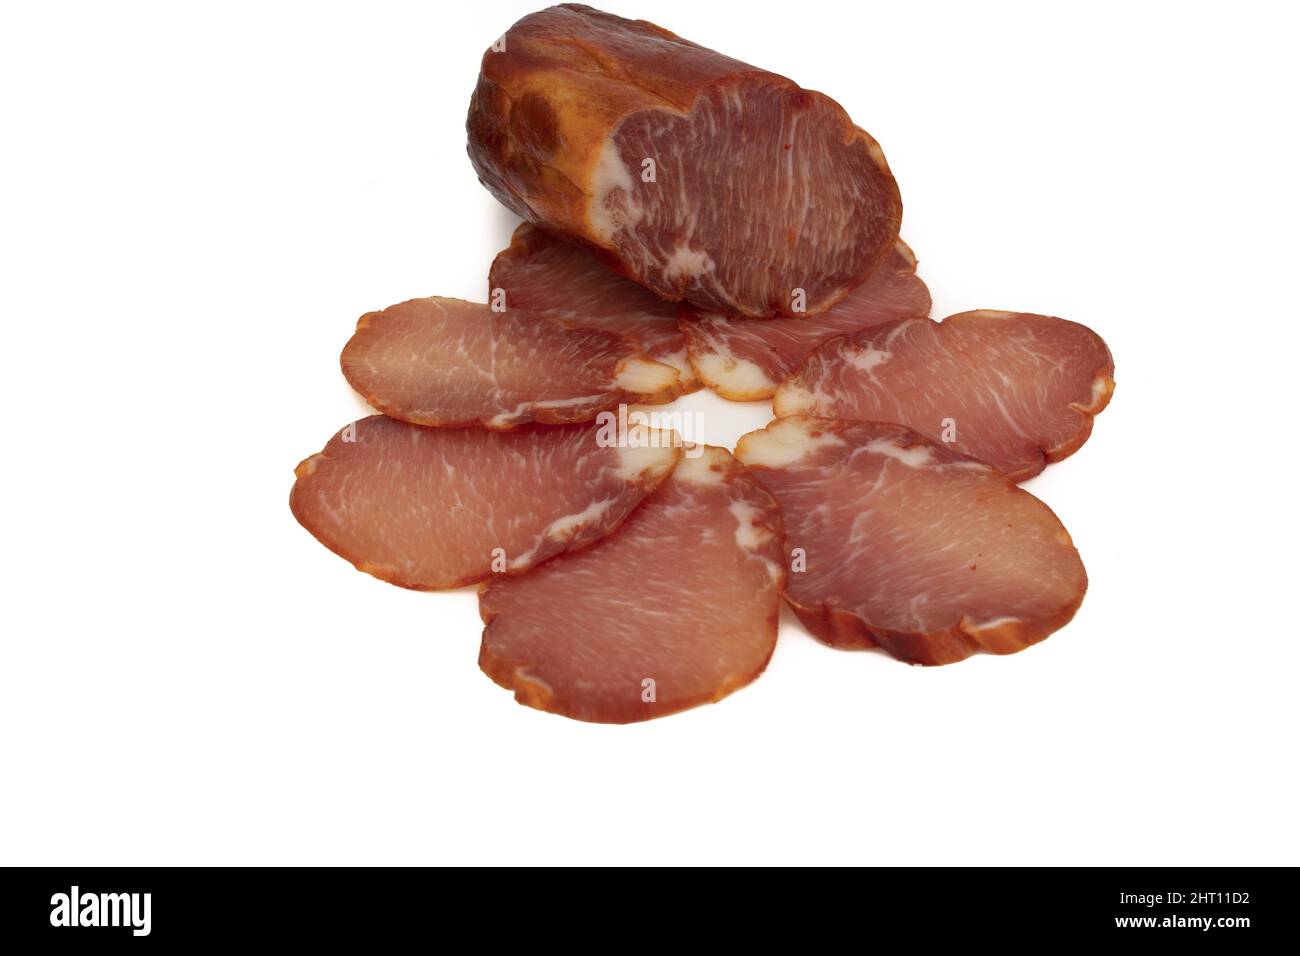 Slices of Spanish Iberian loin sausages on a white background Stock Photo